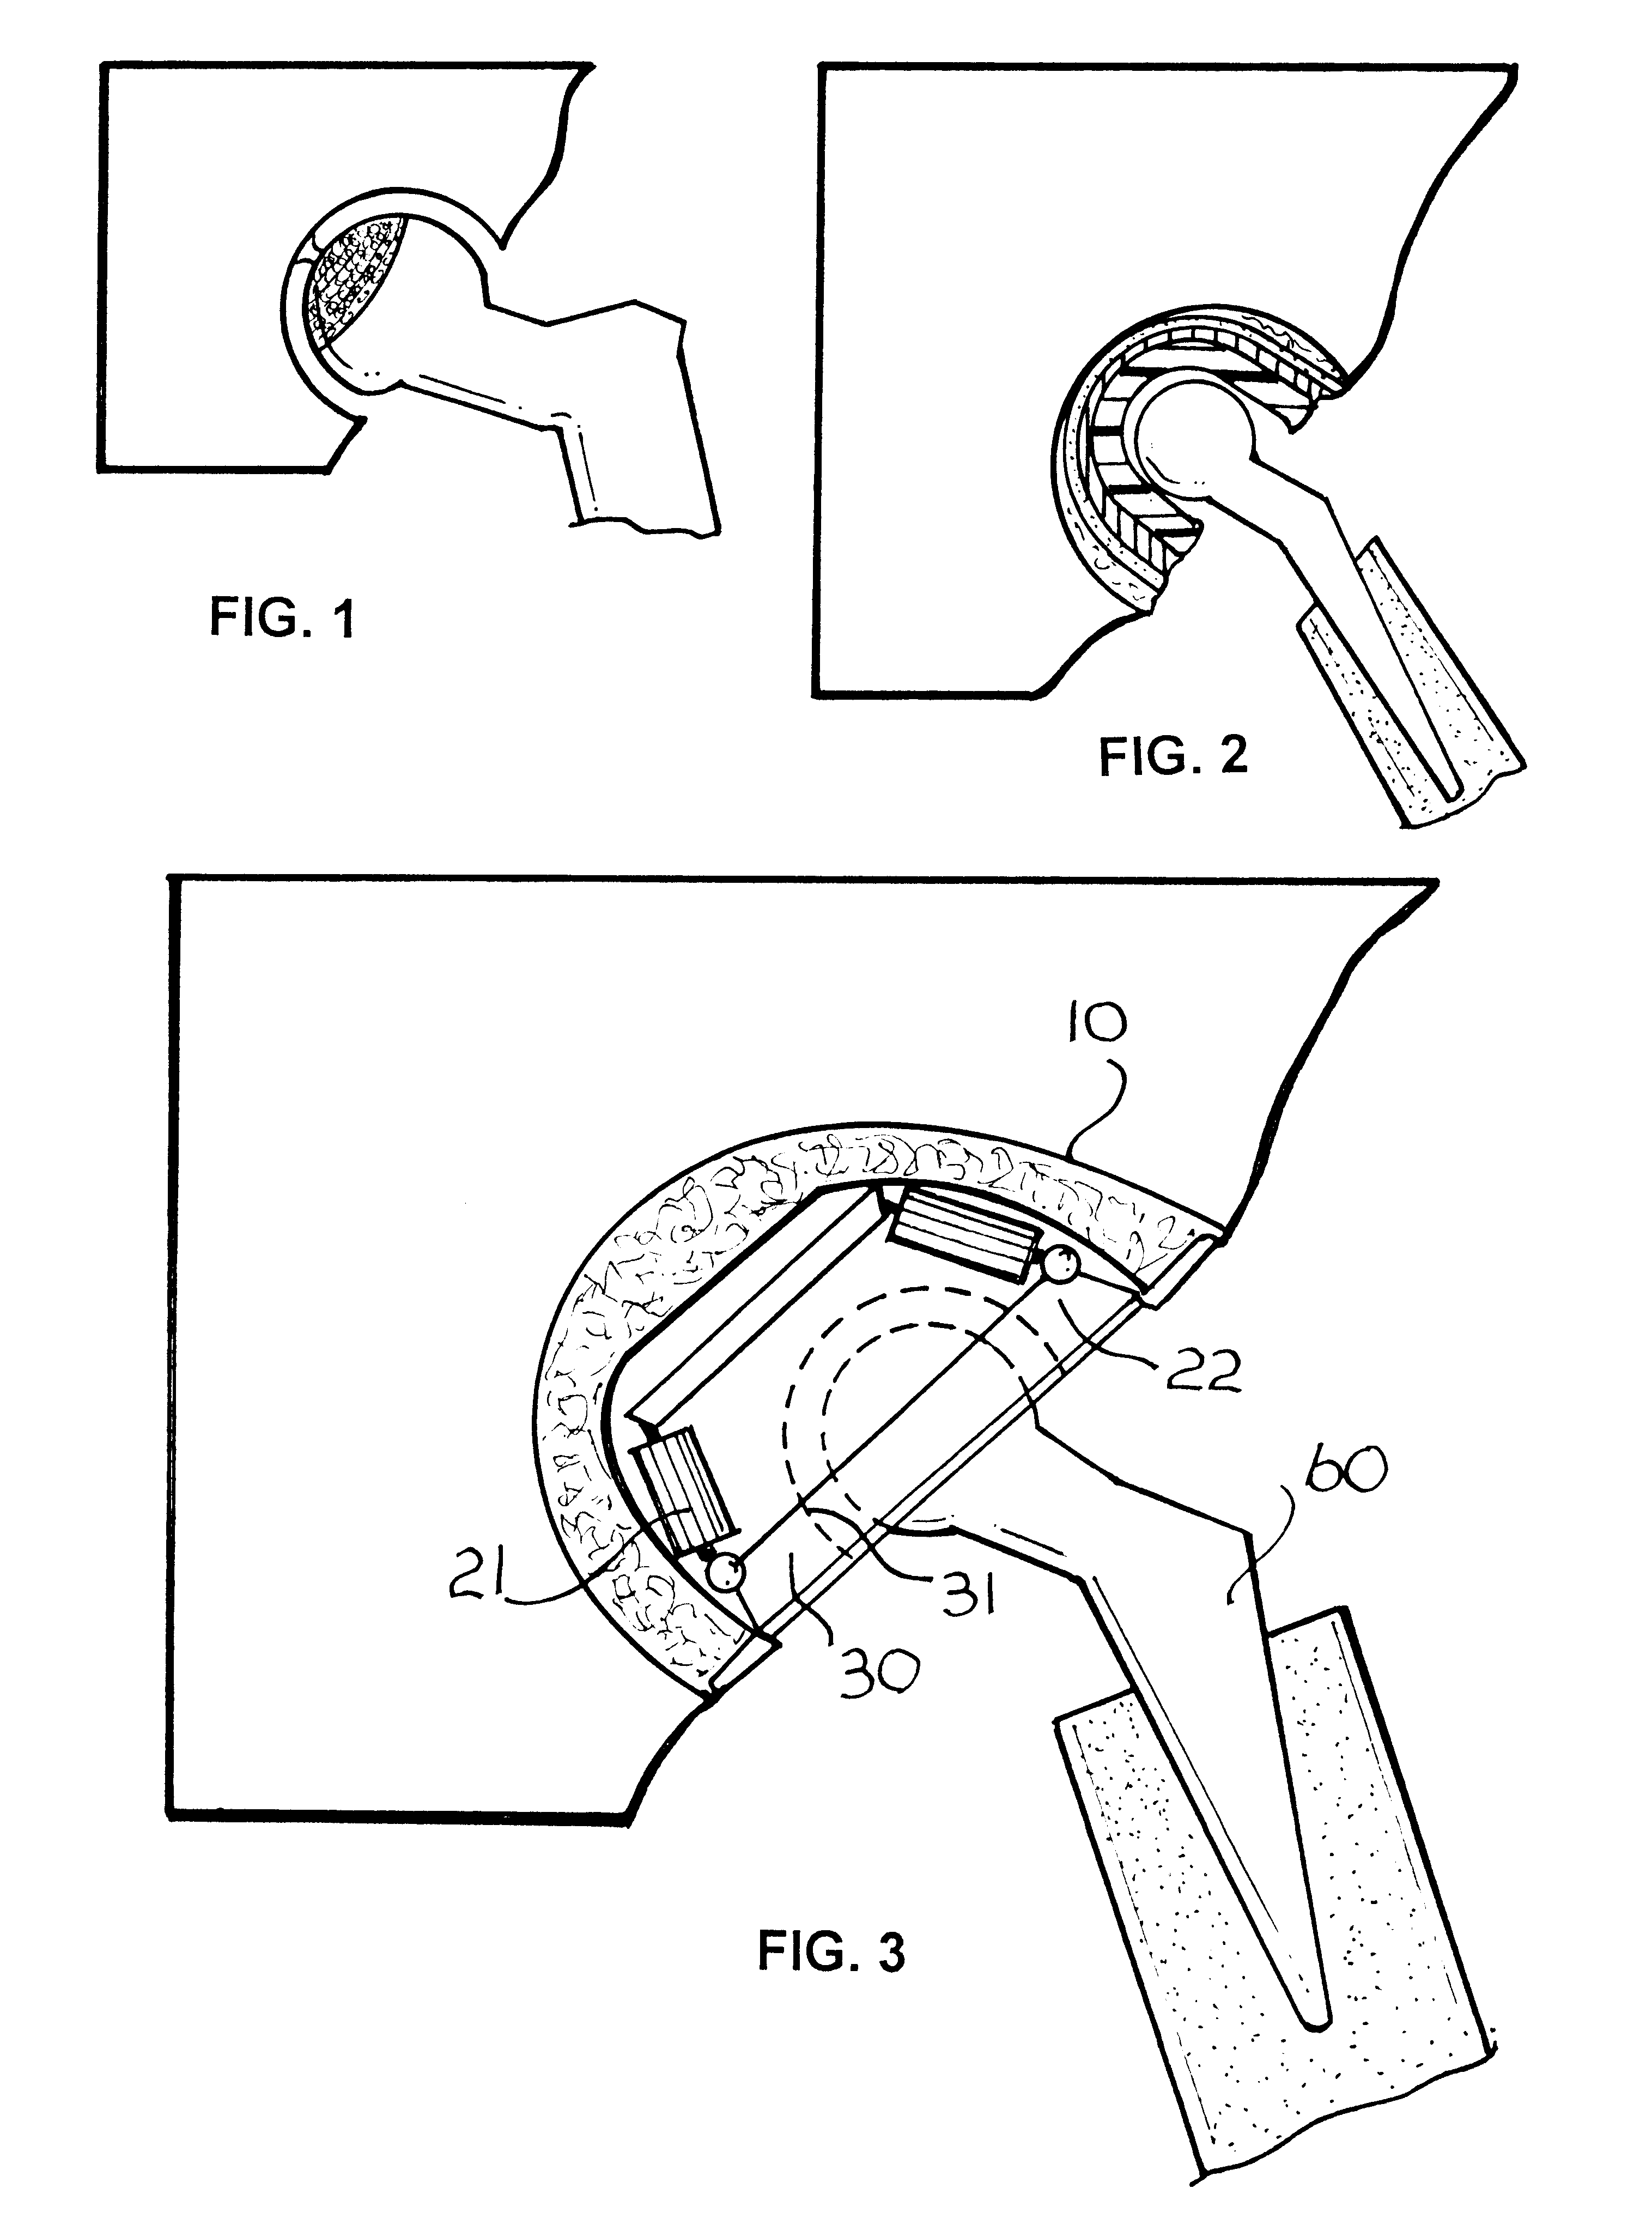 Primary axis prosthetic joint design